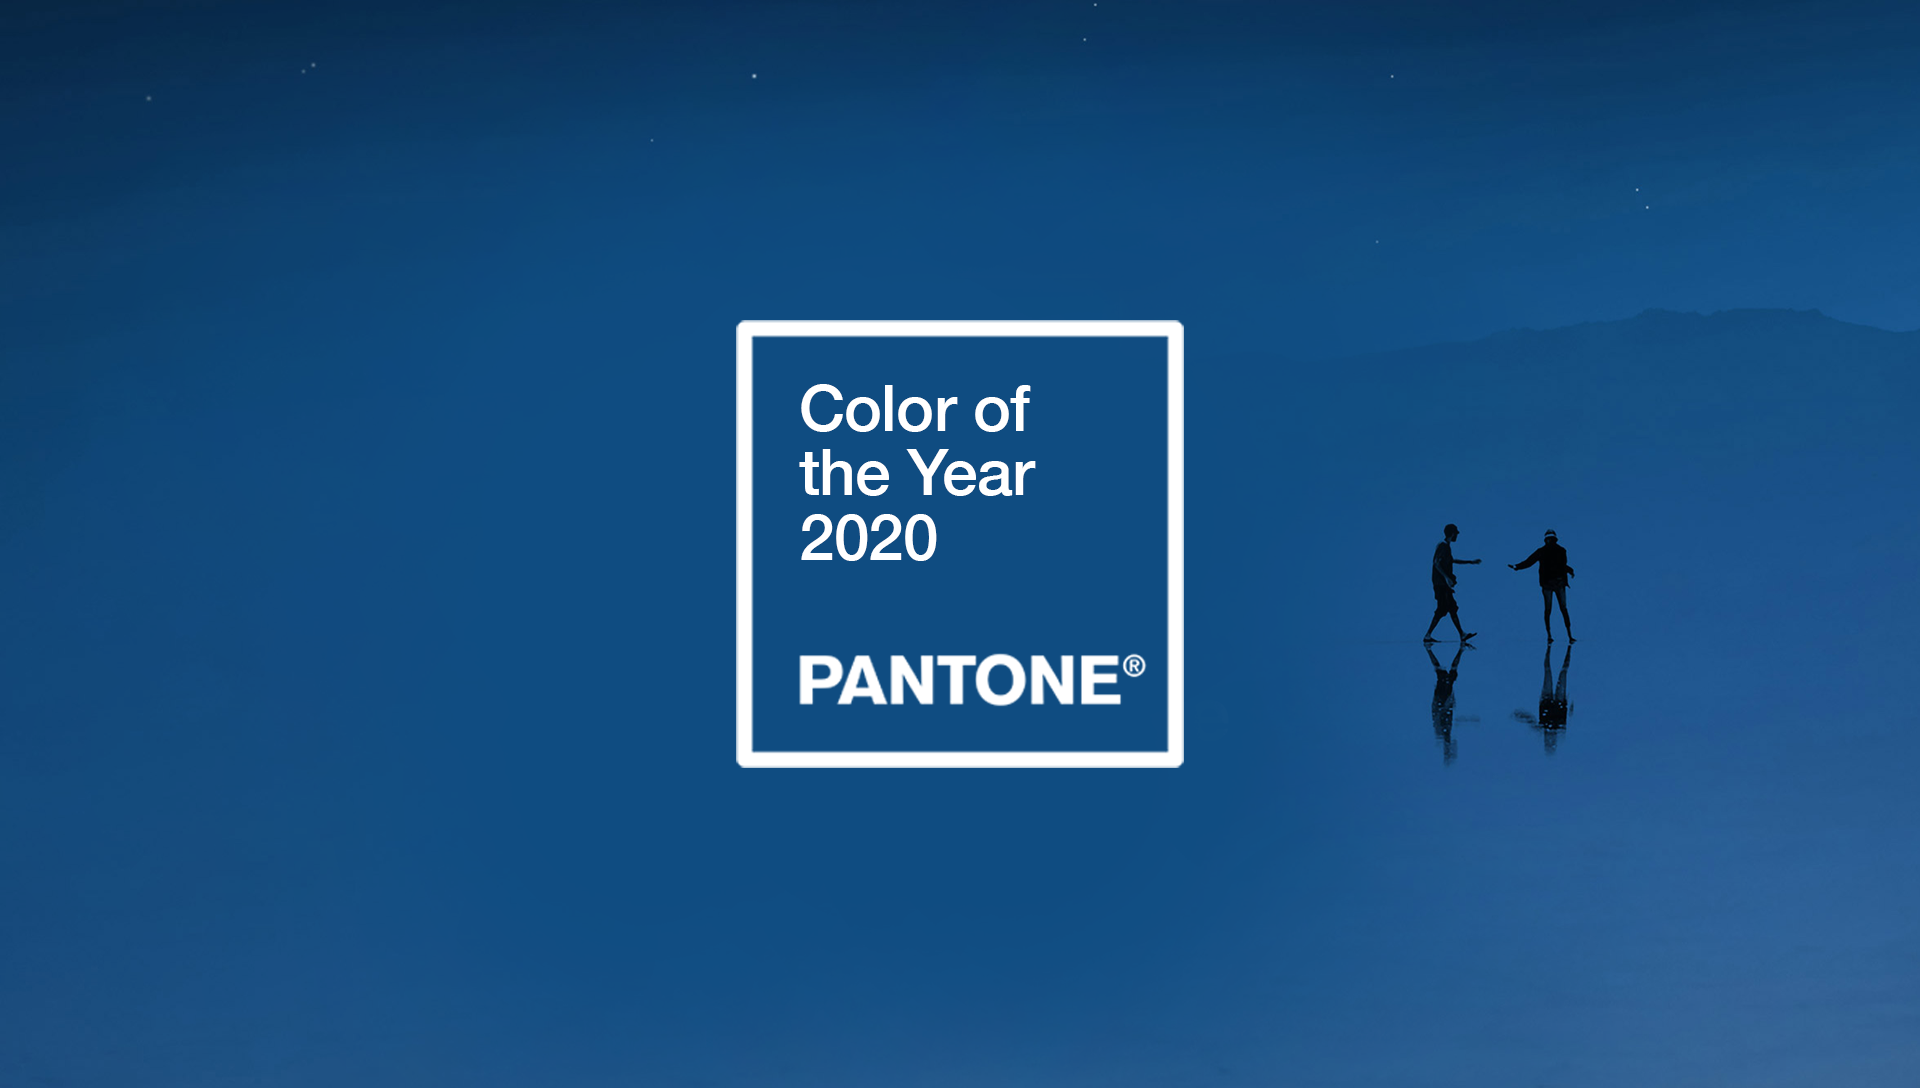 The official Pantone Classic Blue image.